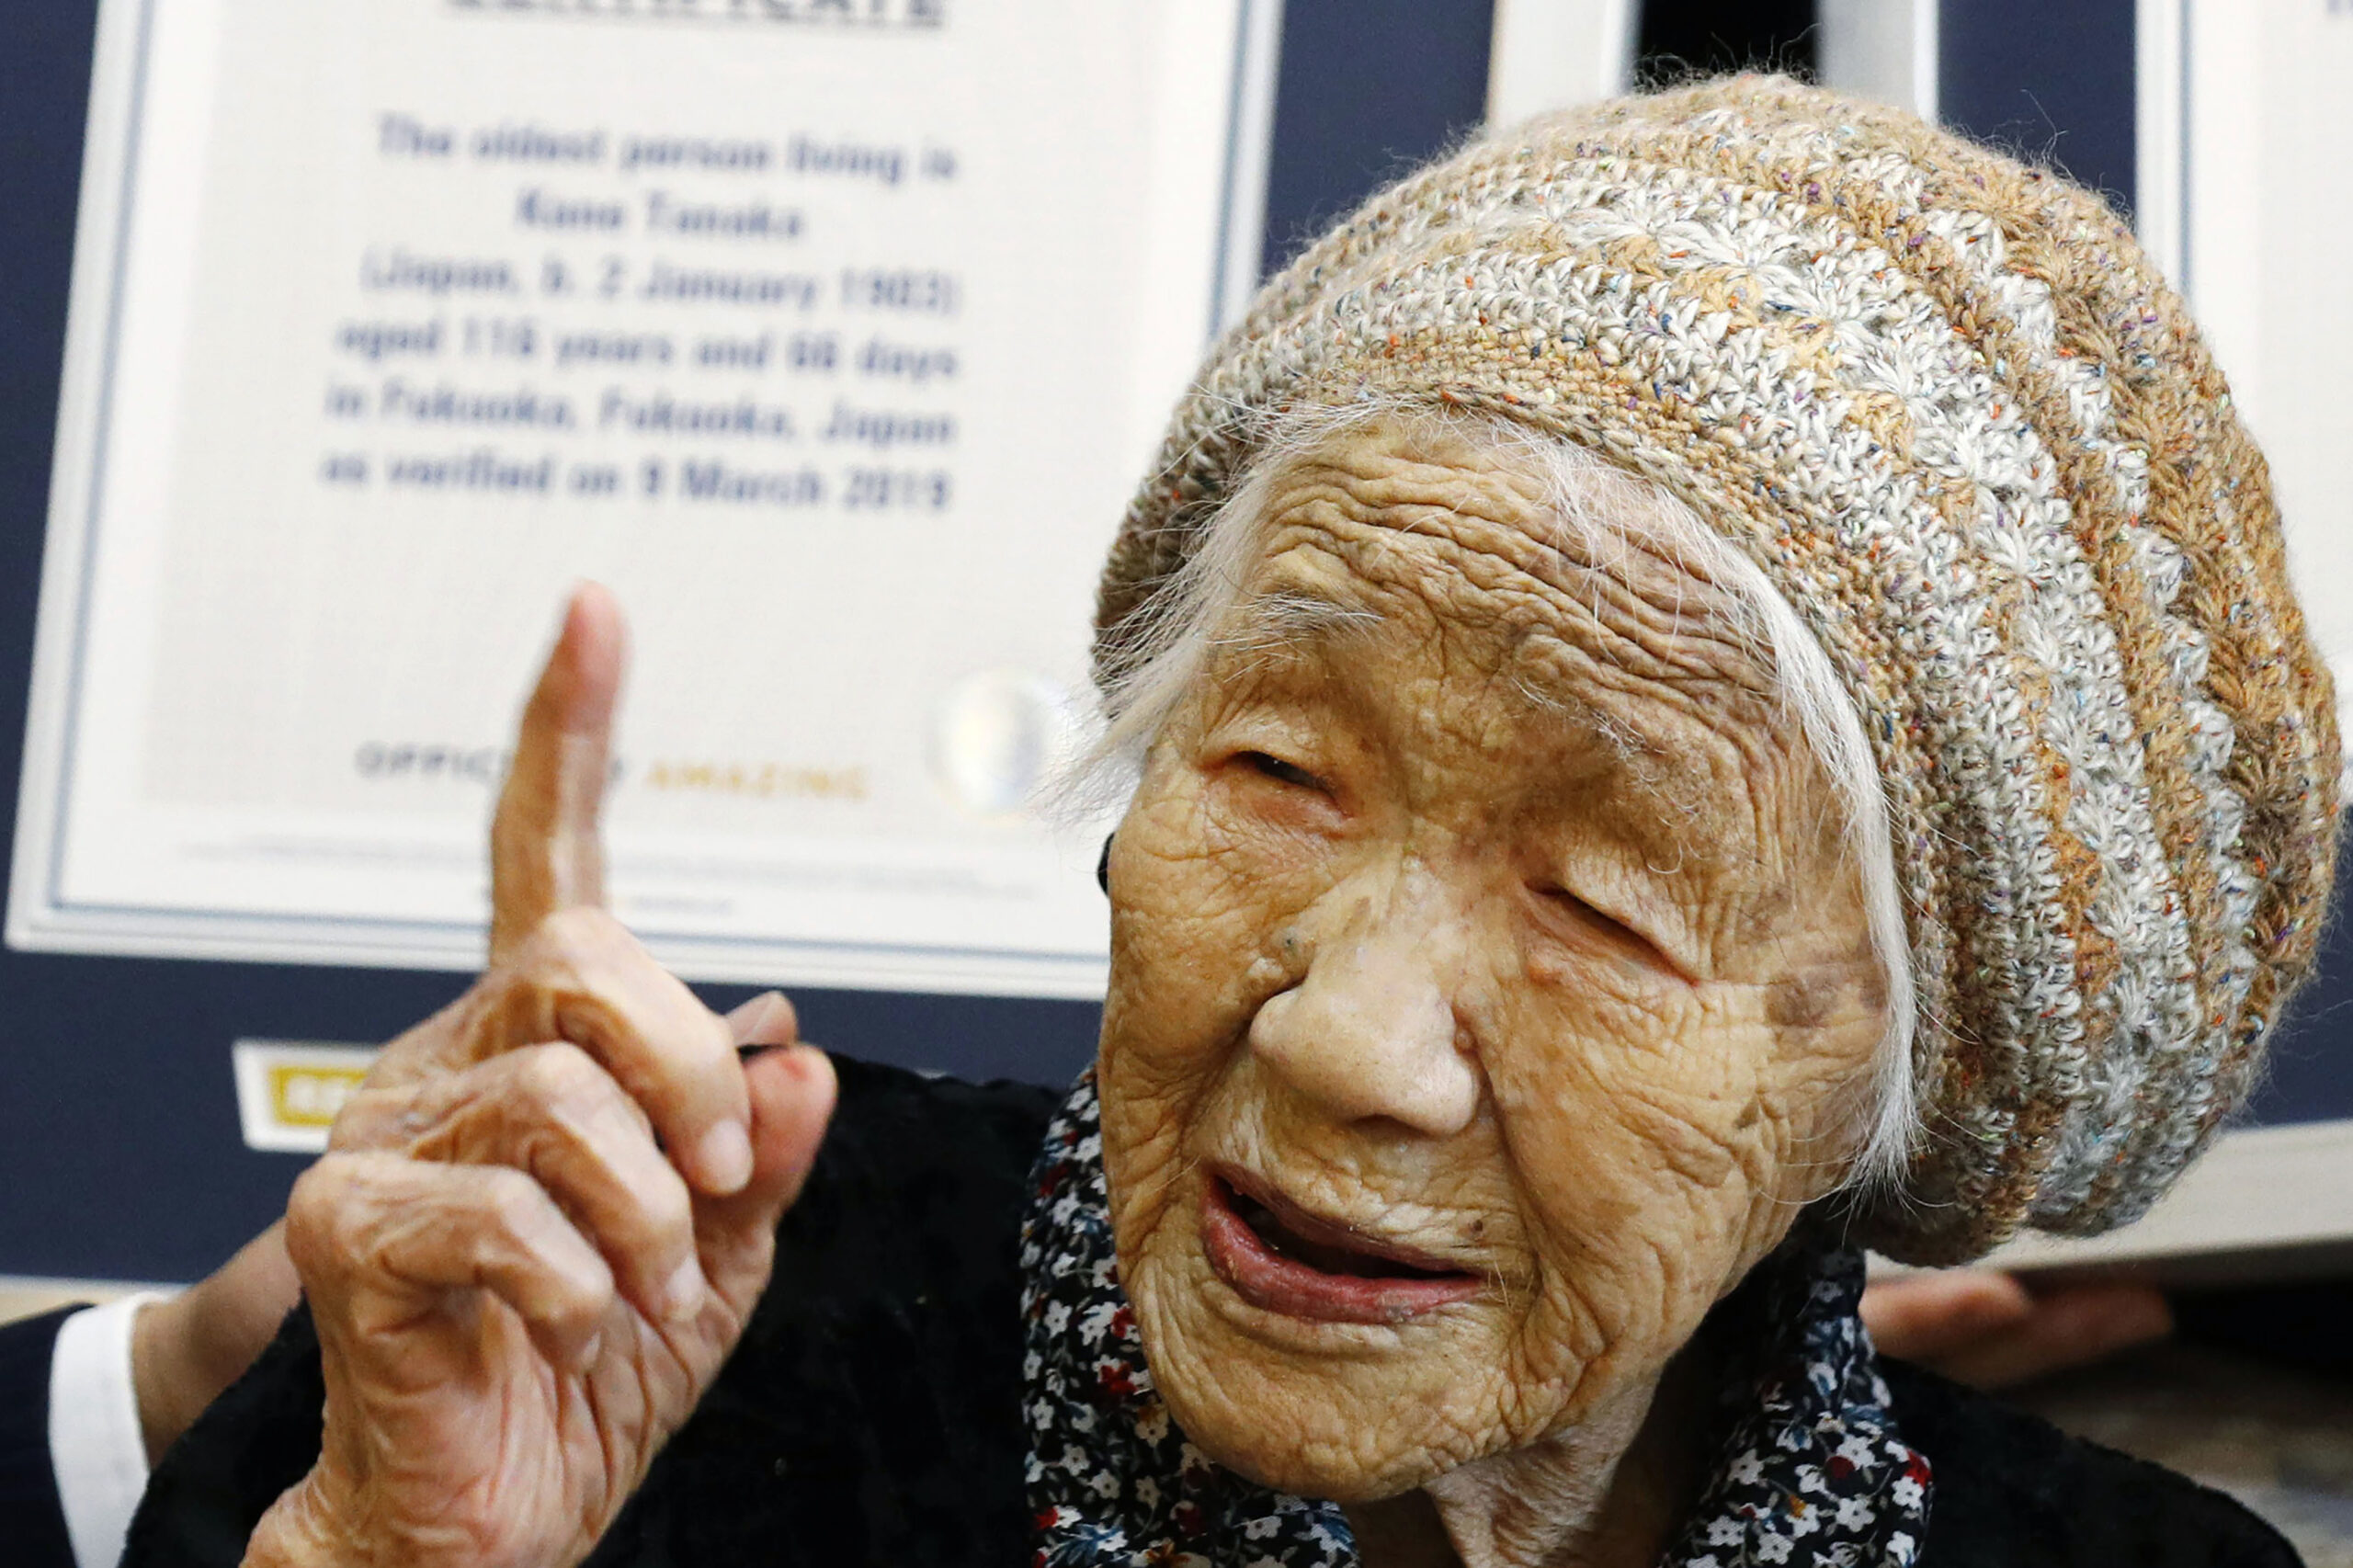 FILE - Kane Tanaka, then 116-years-old, reacts after receiving a Guinness World Records certificate, background, at a nursing home where she lives in Fukuoka, southwestern Japan on March 9, 2019. The Japanese woman recognized as the world’s oldest person Tanaka has died at age 119, just months short of her goal of reaching 120. (Takuto Kaneko/Kyodo News via AP, File)